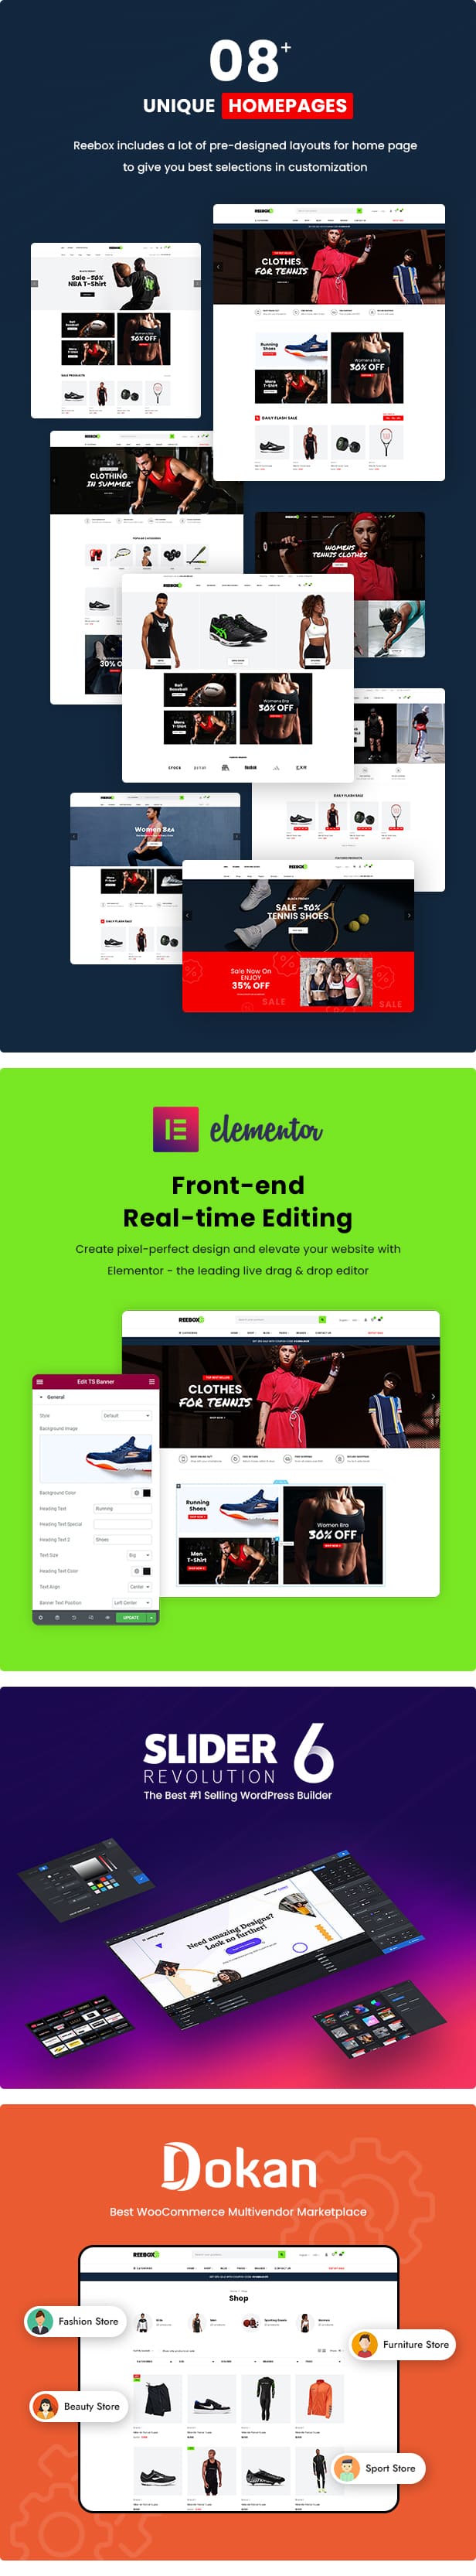 Front-end real-time editing of Reebox - Elementor WooCommerce WordPress Theme.